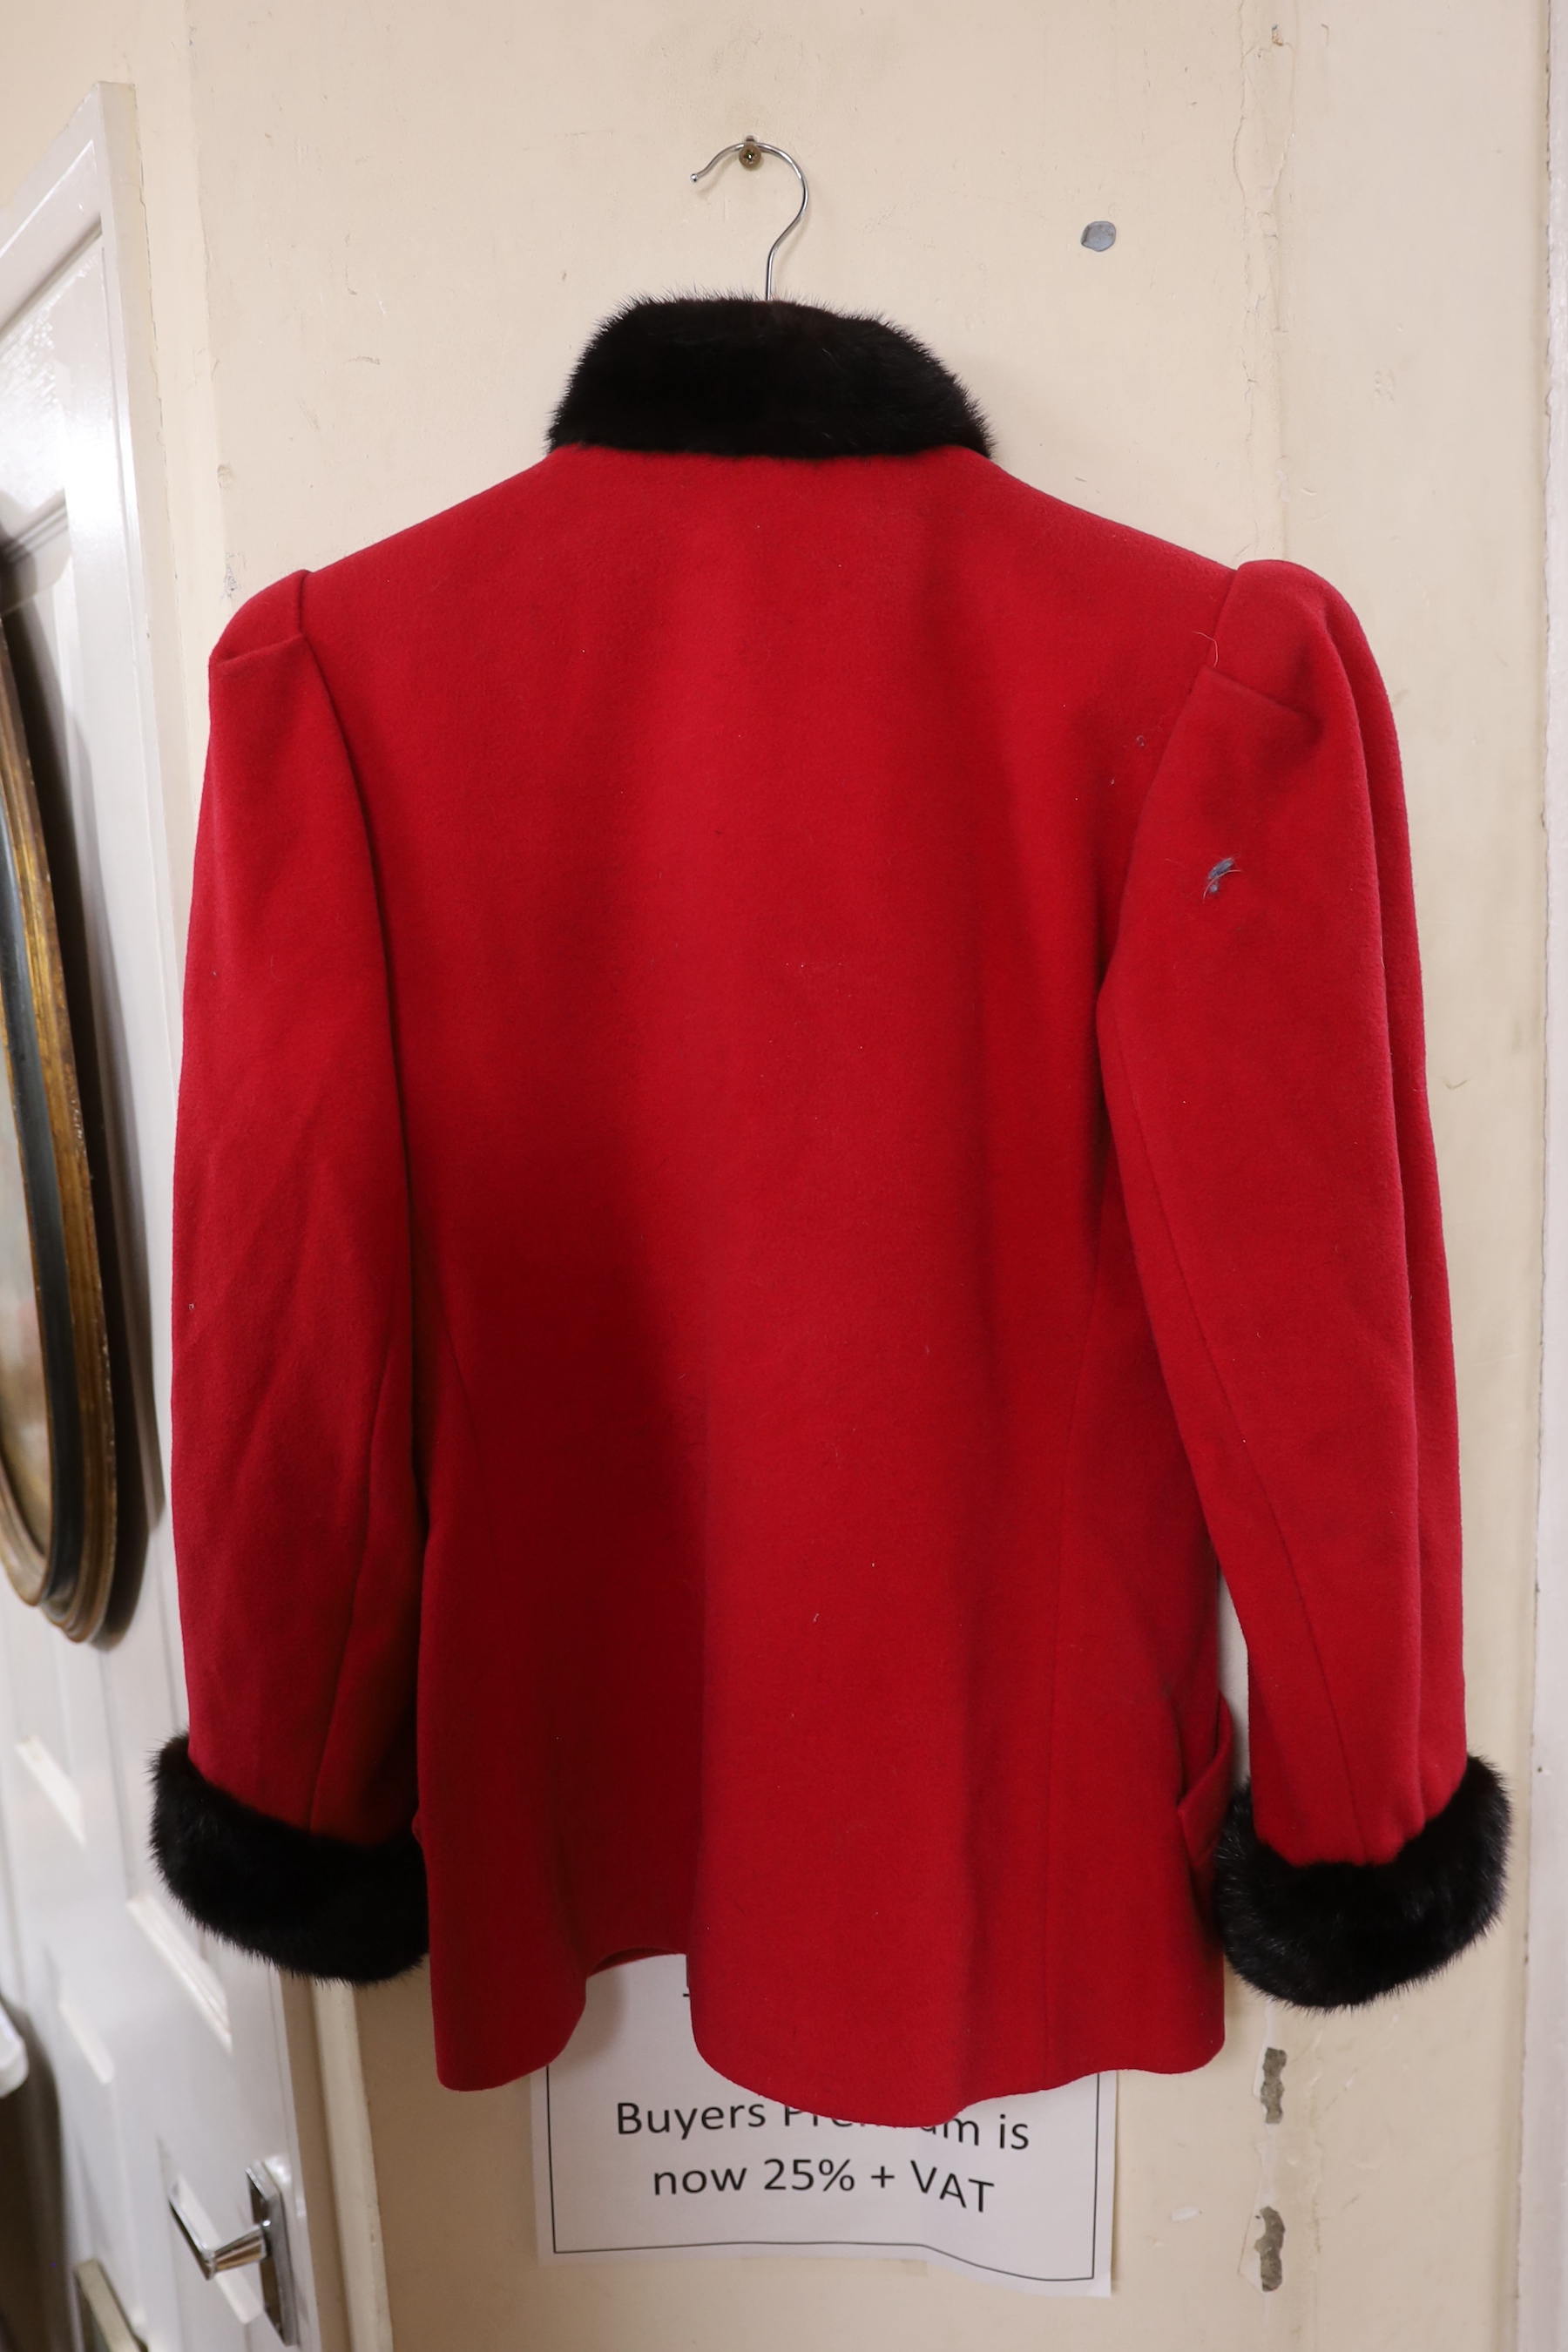 An Yves Saint Laurent ‘variation’, 1980's red wool jacket trimmed with black mink and leather toggle - Image 2 of 2